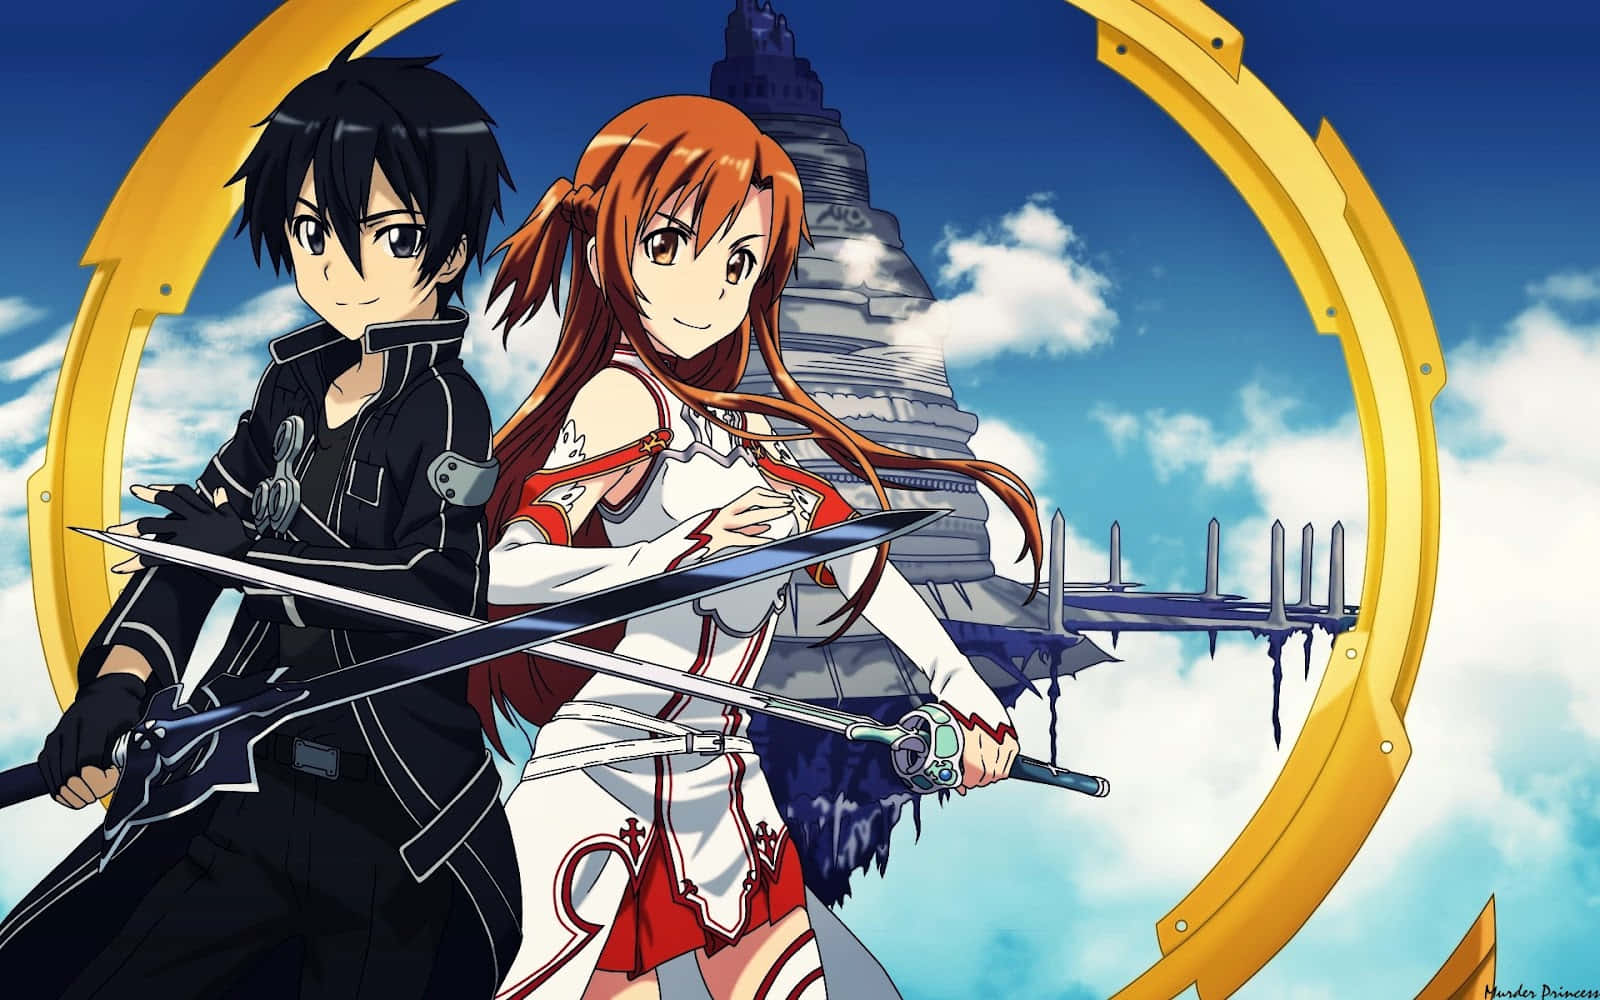 Join Kirito and the gang on their epic journey through the virtual world of Aincrad.